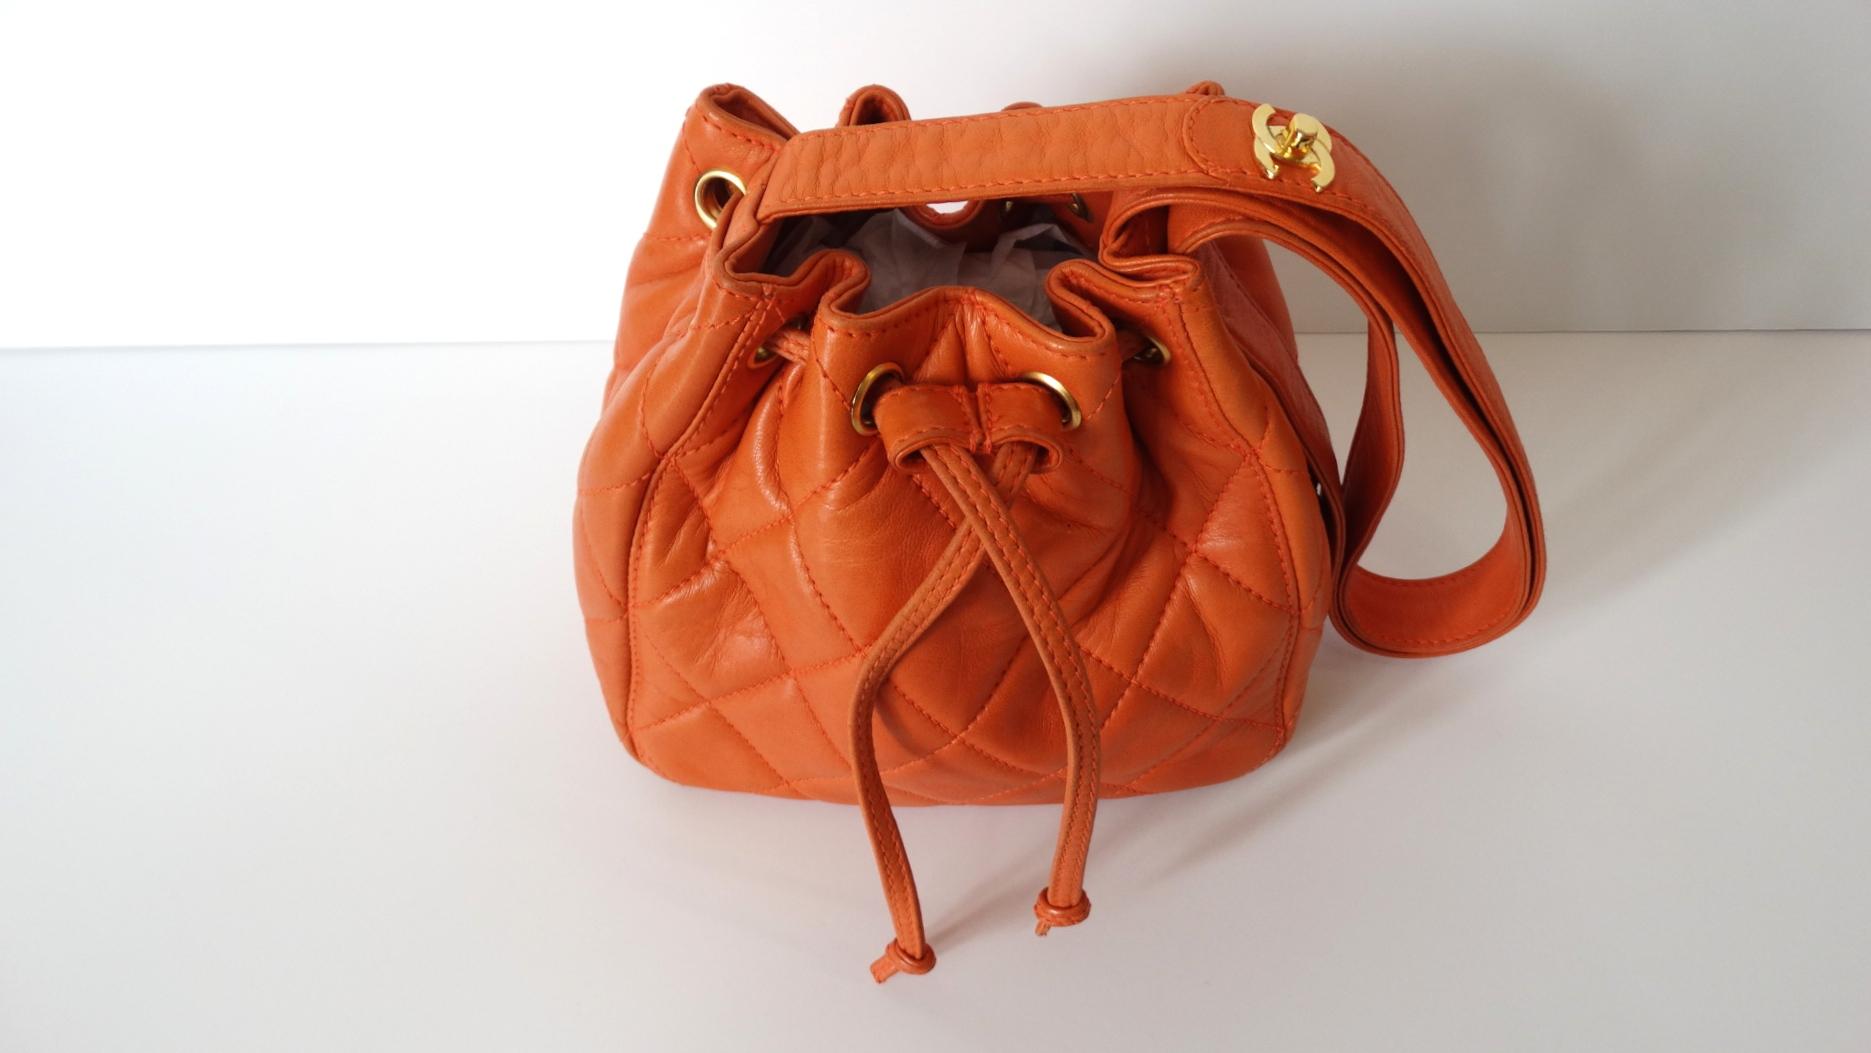 Treat yourself to a piece of fashion history- Karl Lagerfeld era Chanel orange bucket bag circa 1994-1996! Crafted from a soft lambskin leather and stitched with Chanel's signature quilting. Bucket-bag style construction with leather shoulder strap.